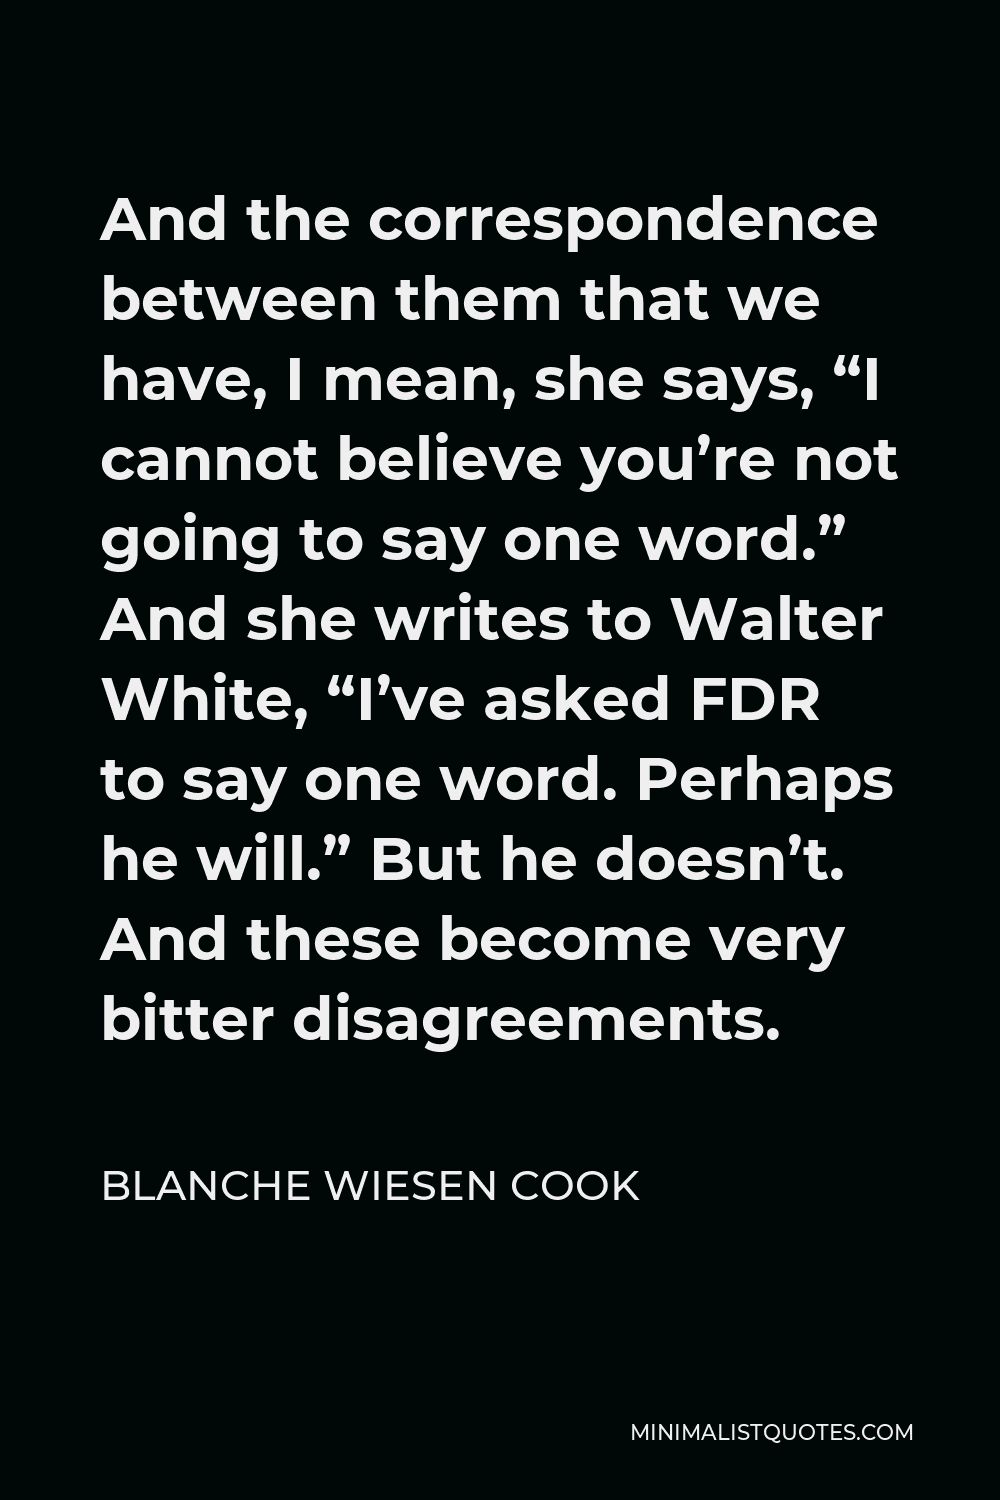 Blanche Wiesen Cook Quote - And the correspondence between them that we have, I mean, she says, “I cannot believe you’re not going to say one word.” And she writes to Walter White, “I’ve asked FDR to say one word. Perhaps he will.” But he doesn’t. And these become very bitter disagreements.